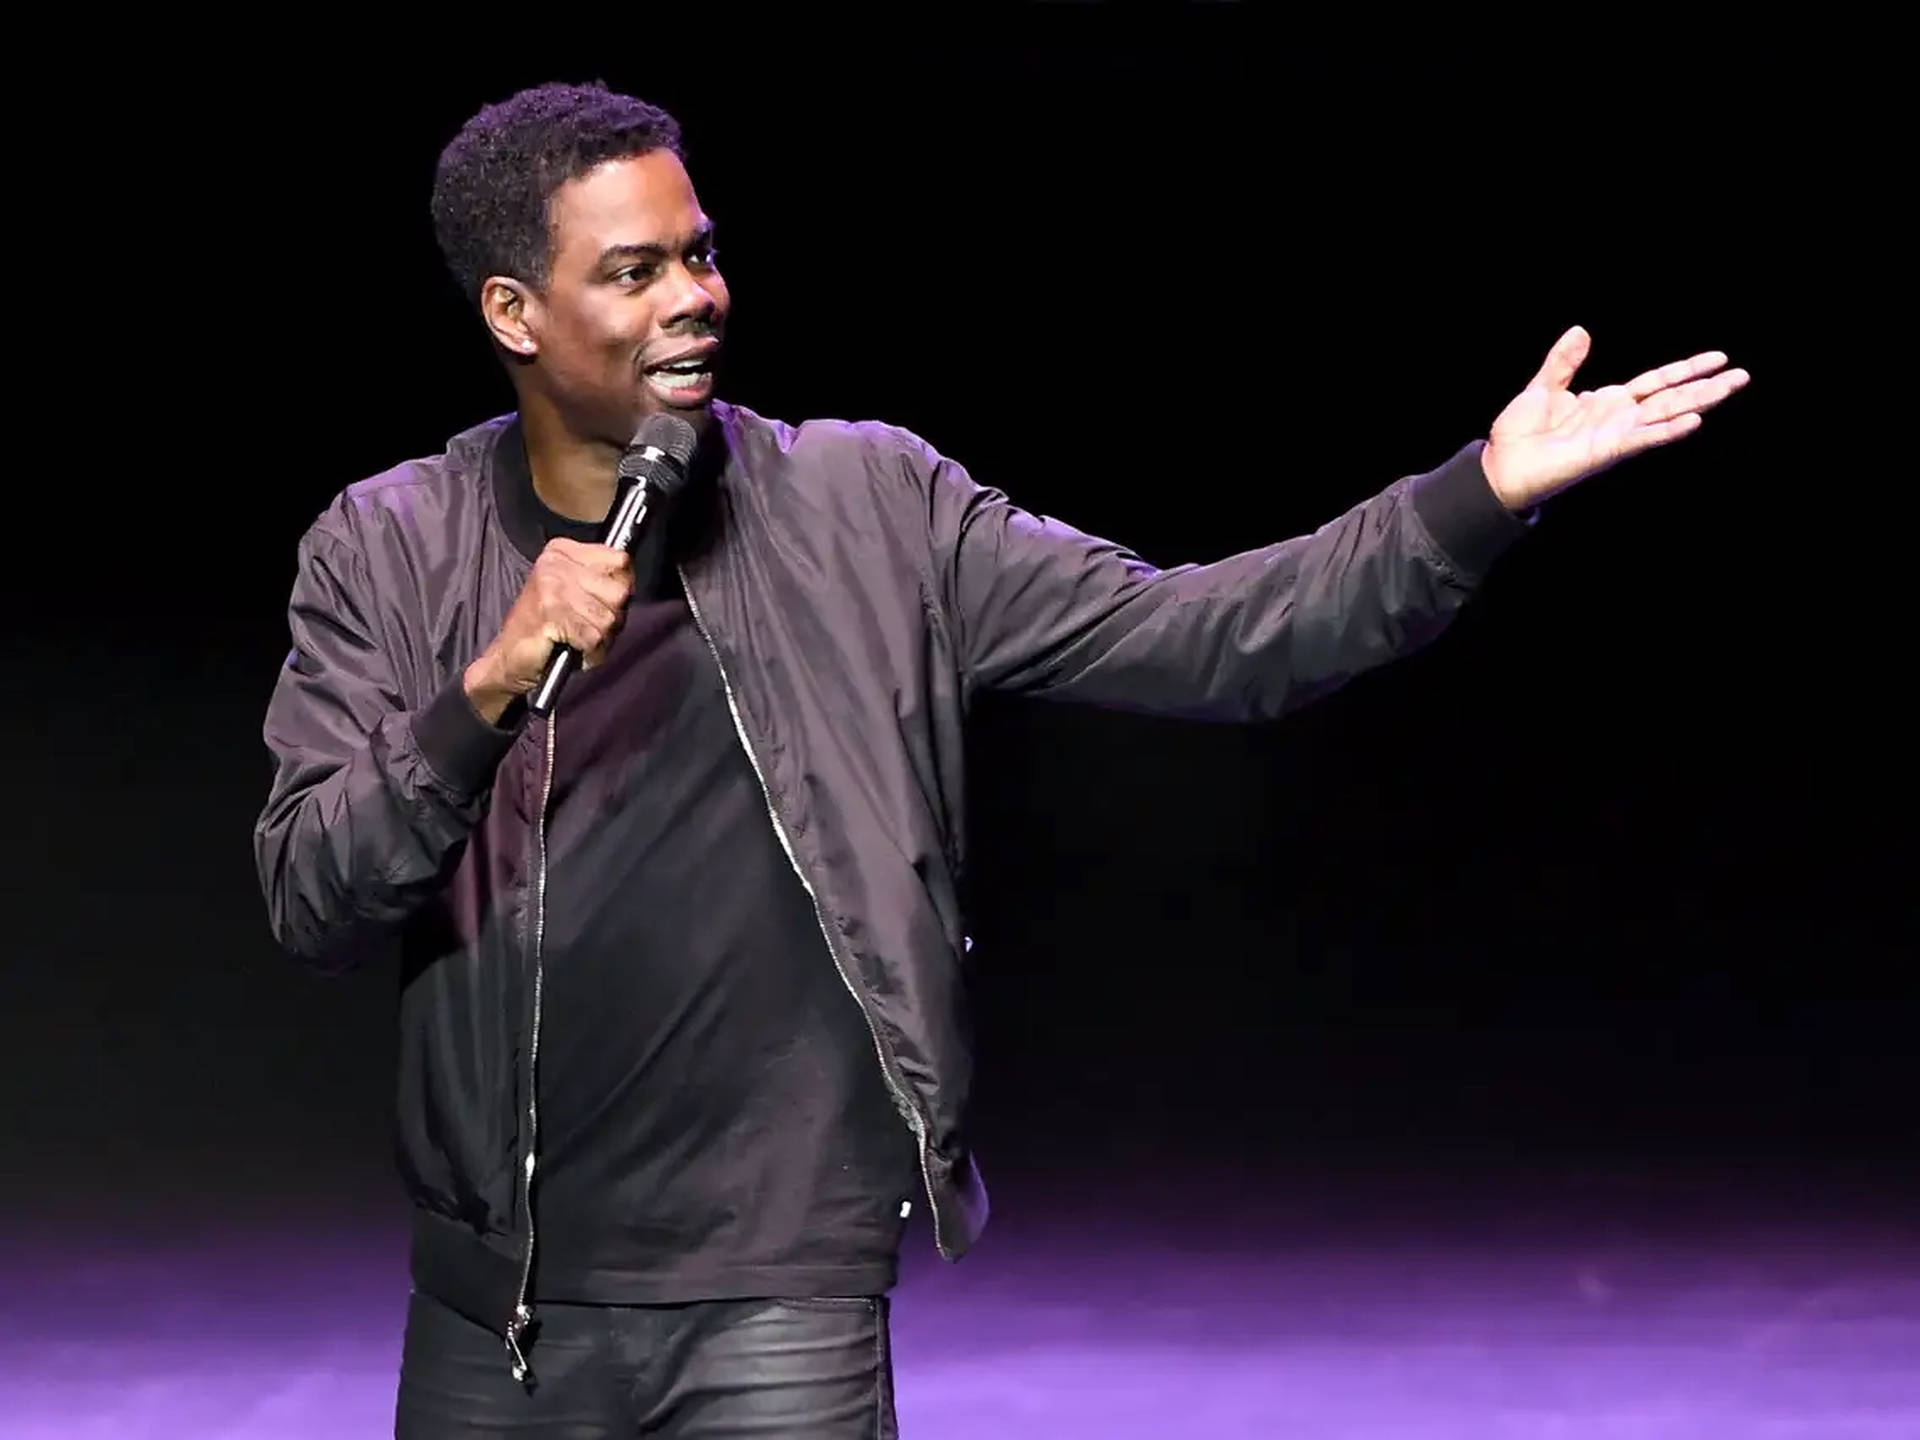 Comedian Chris Rock On Stage Background